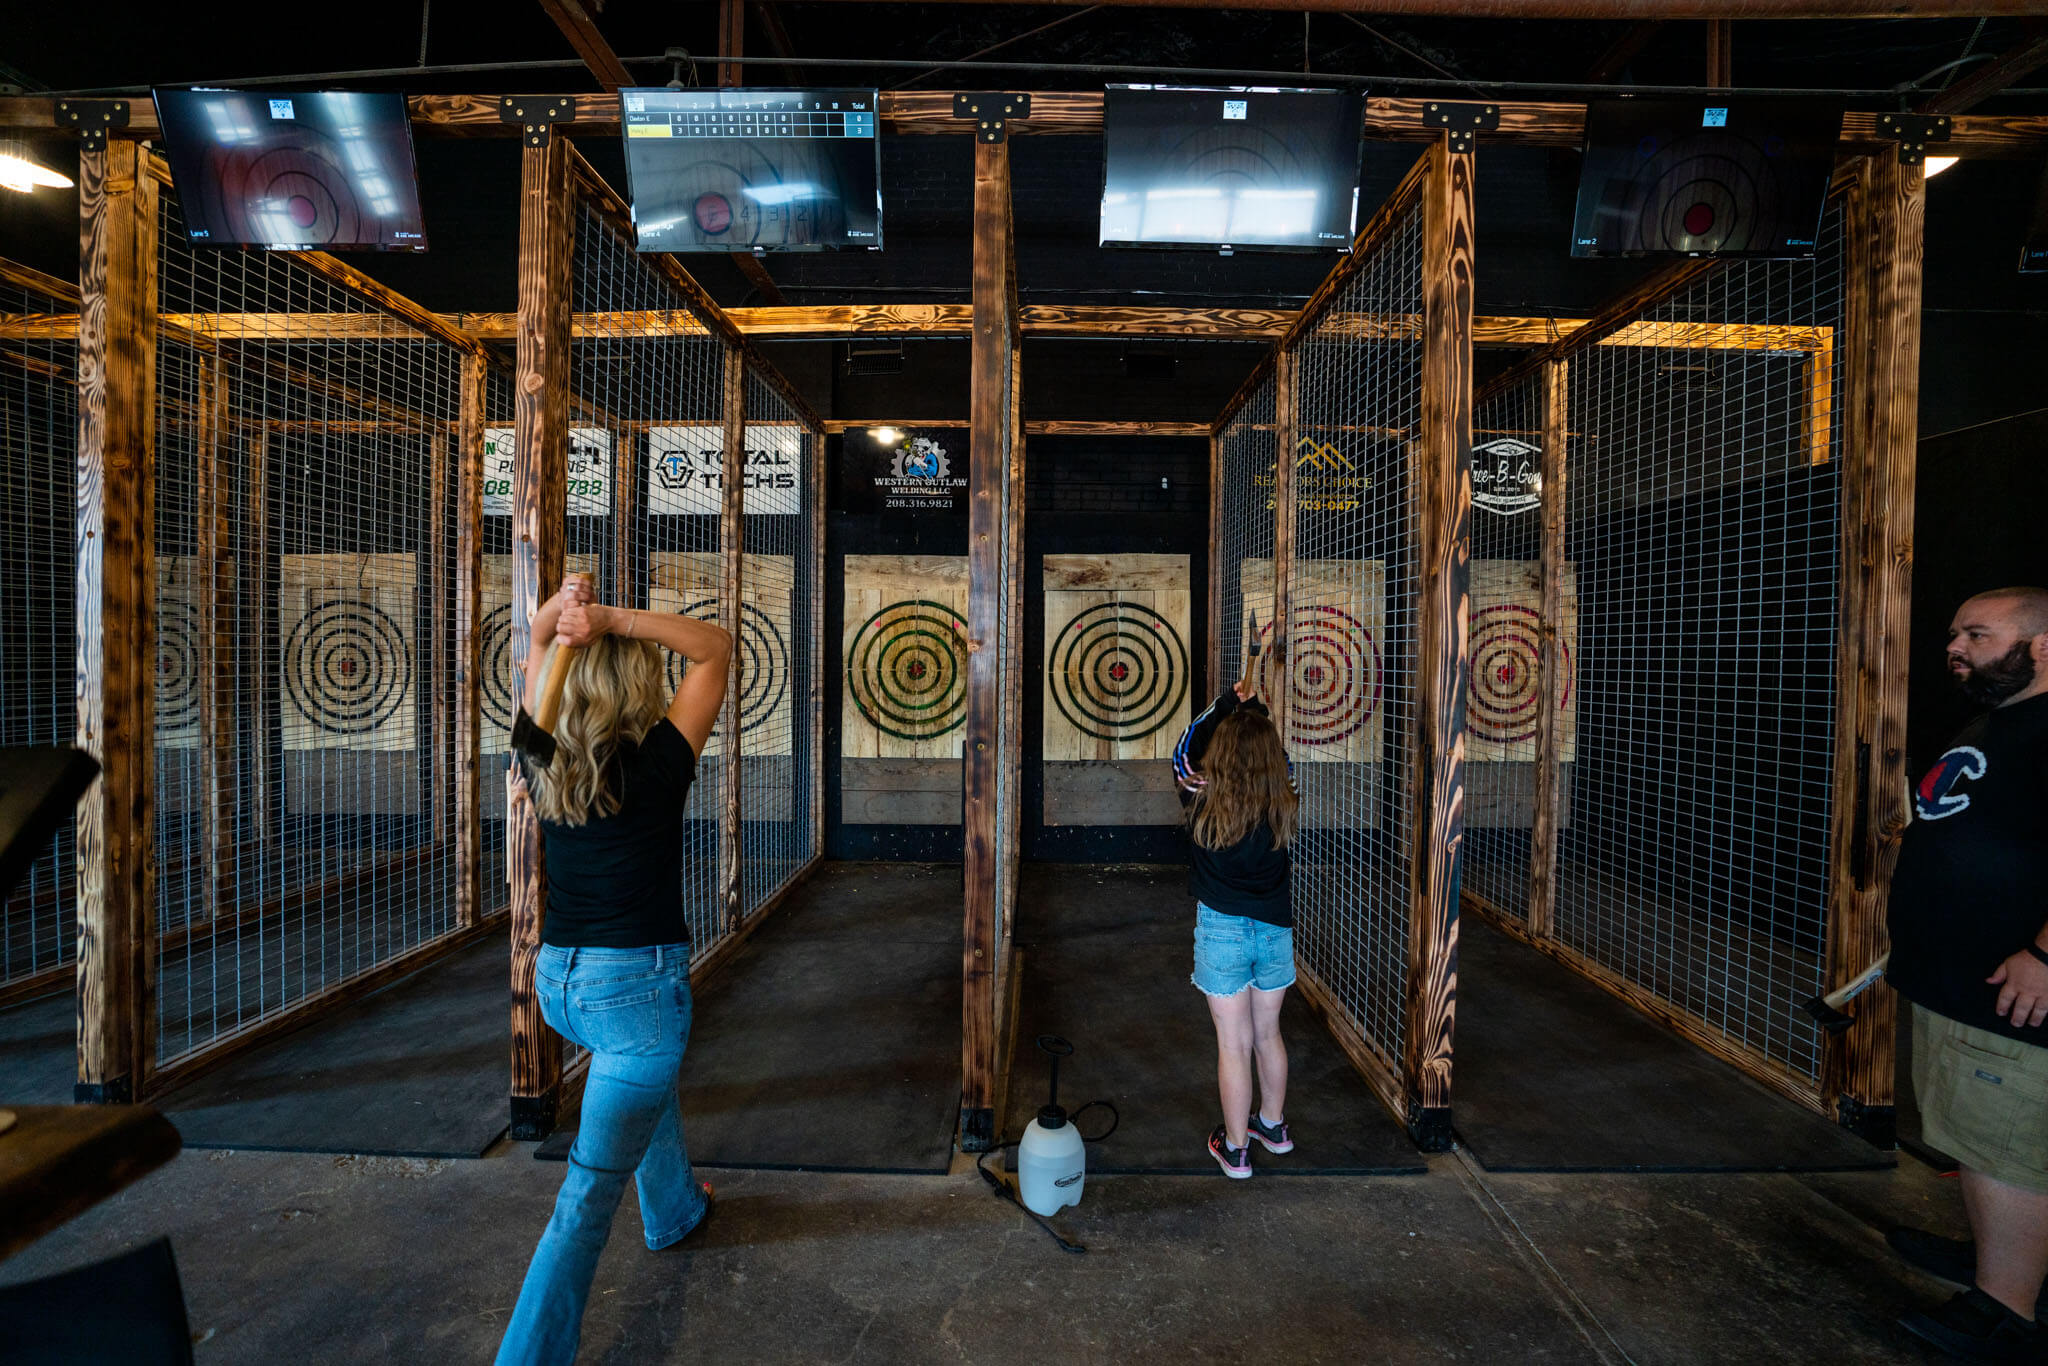 A woman and child prepare to throw axes at wooden targets in an indoor facility as a man watches on.